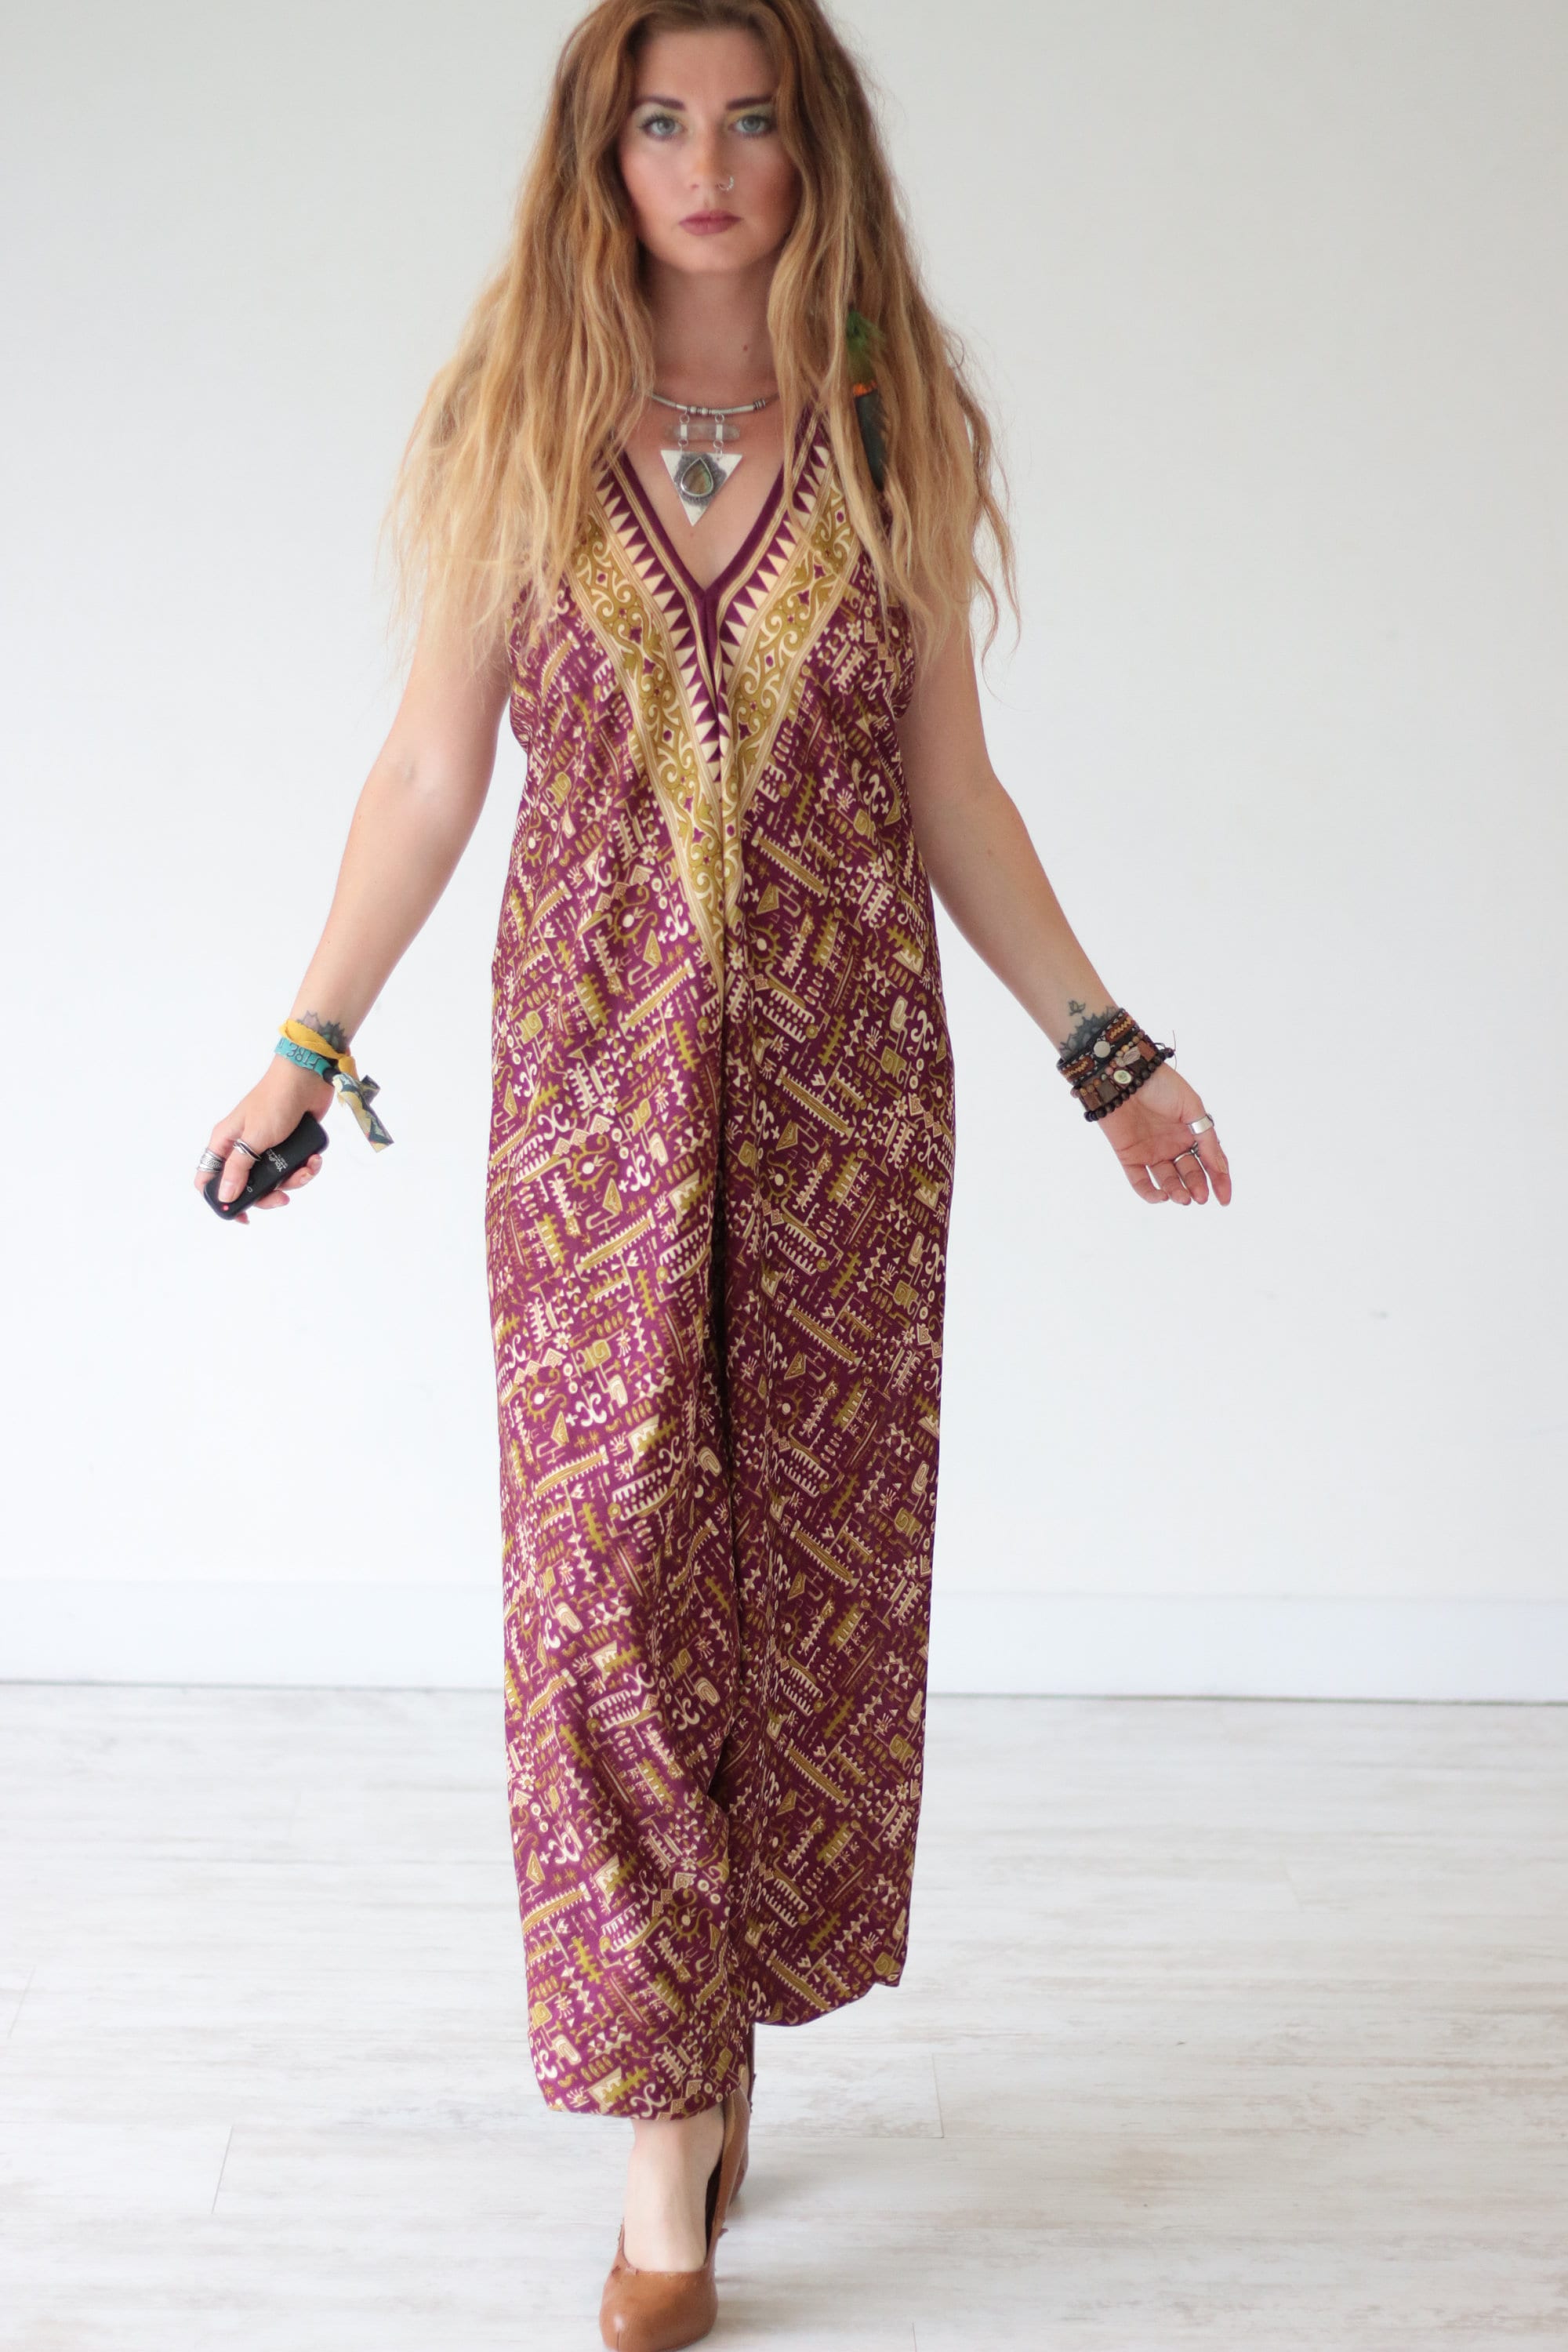 GYPSY SOUL JUMPSUIT - Summer - Backless - Festival All in one ...